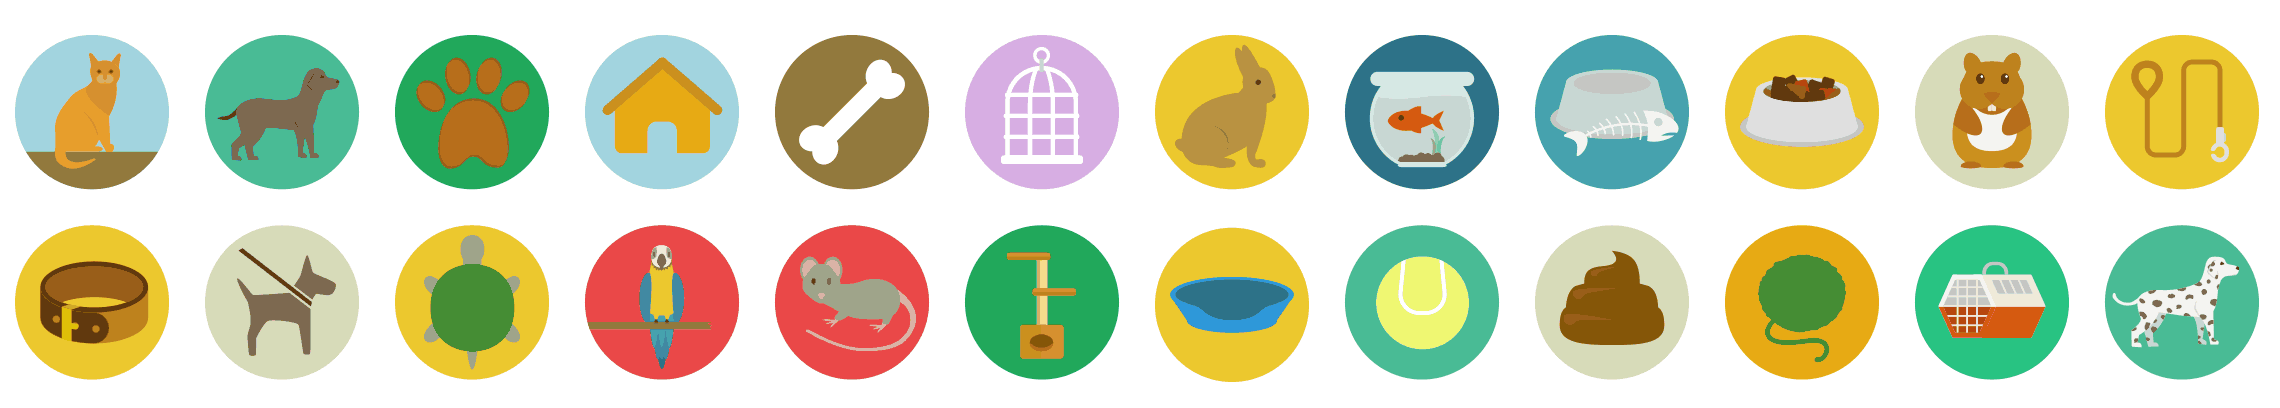 pets-flat-icons-vol-1-preview